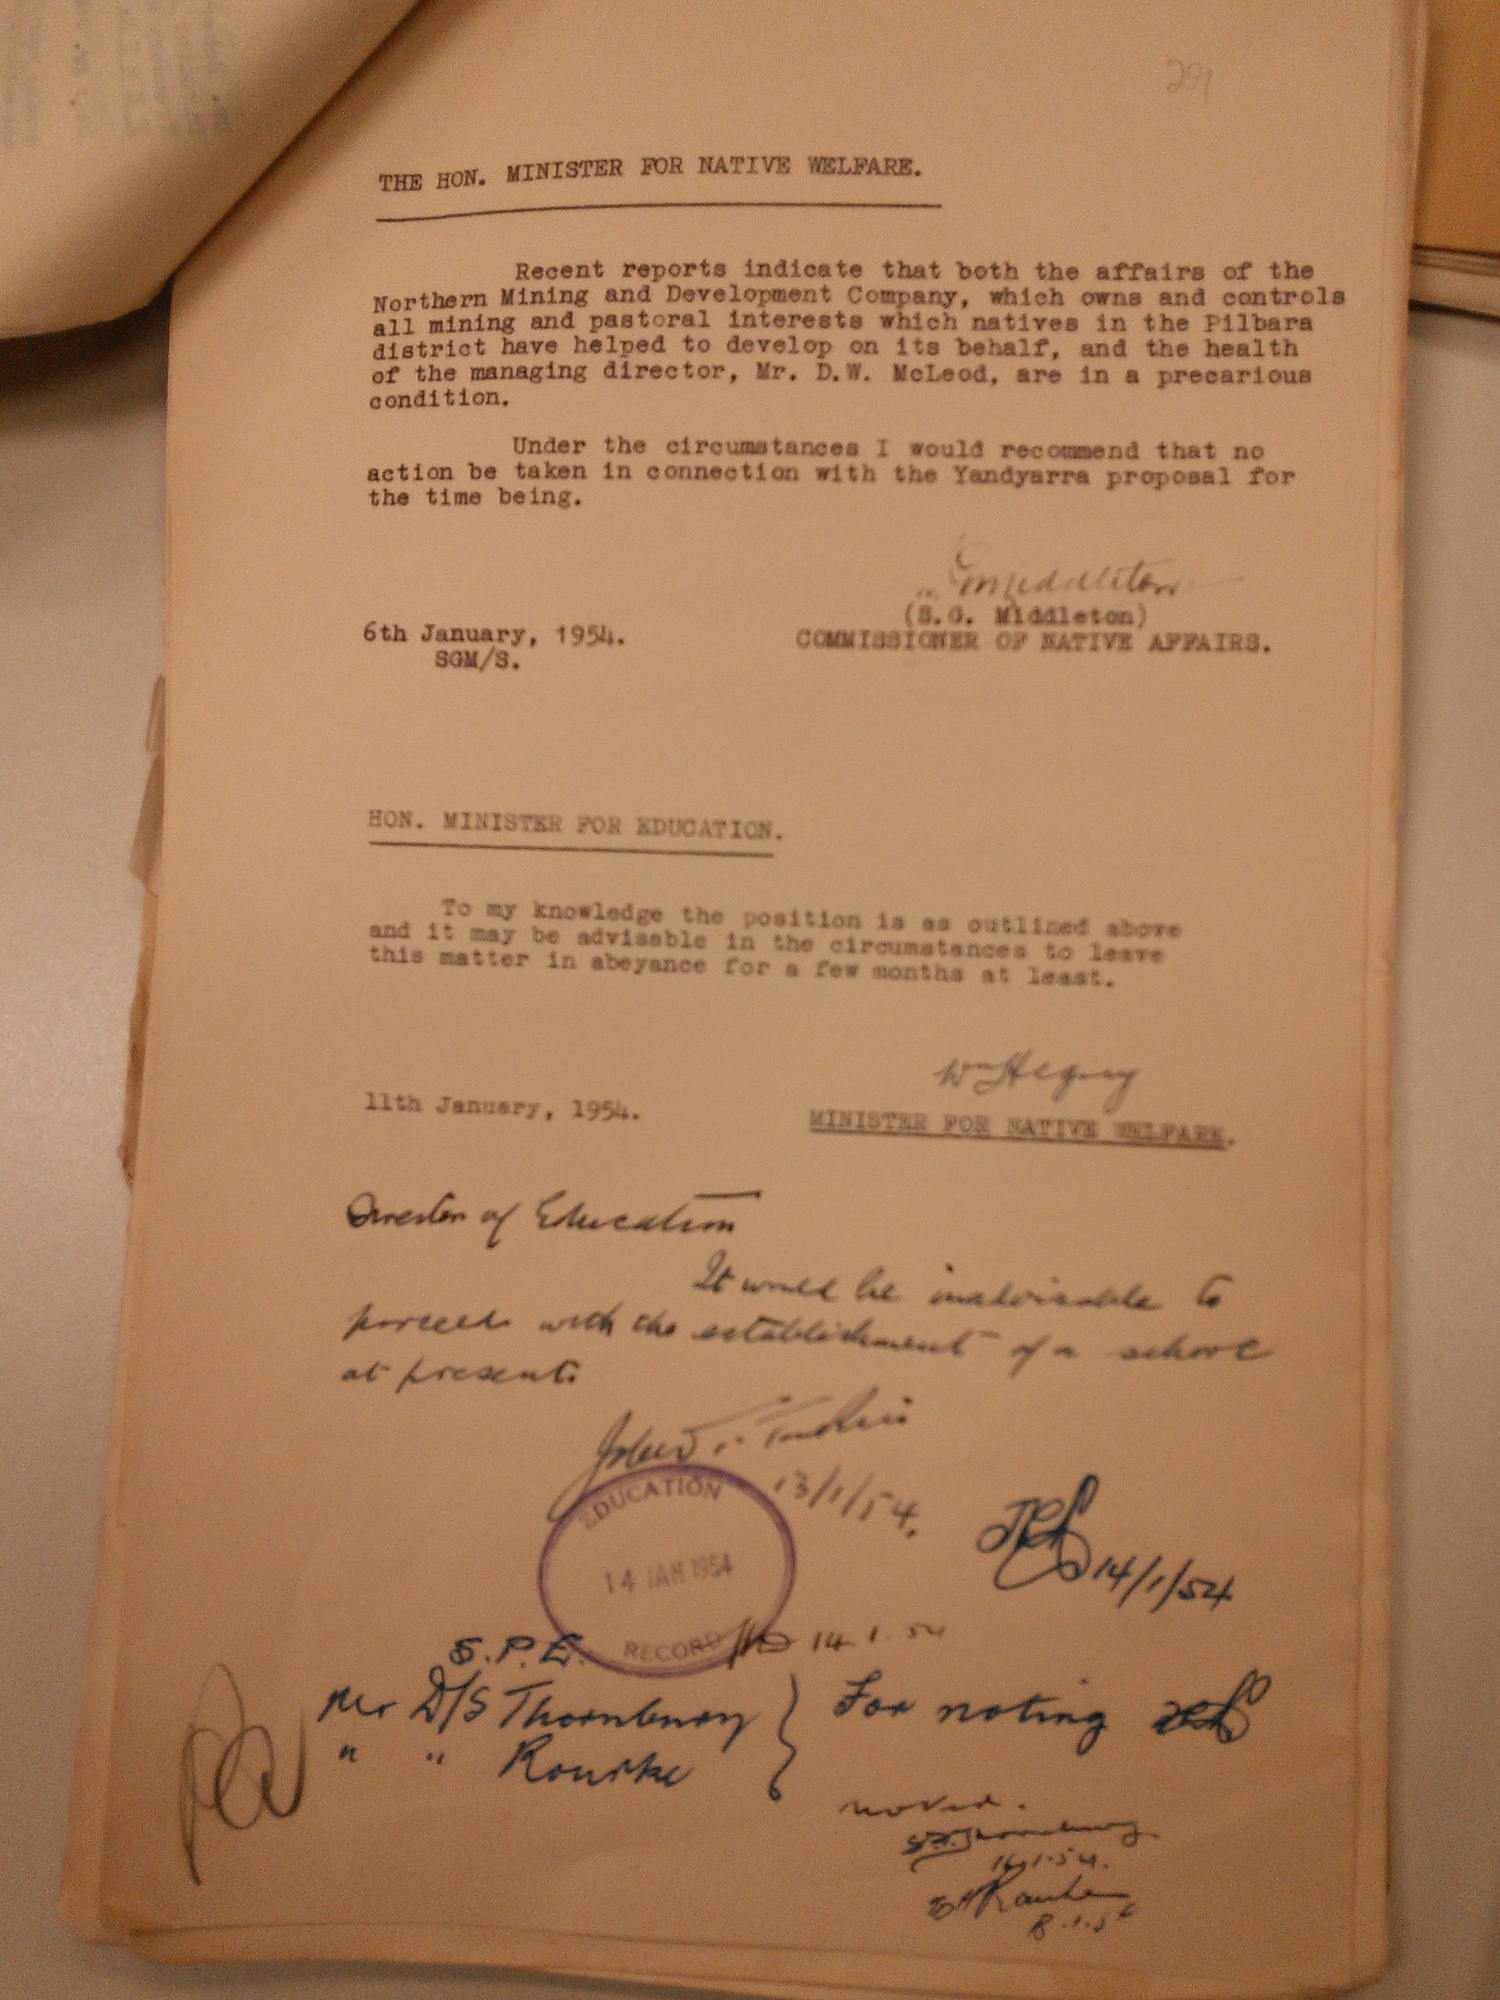 Stan Middleton to Minister for Native Affairs Bill Hegney, 6 January 1954